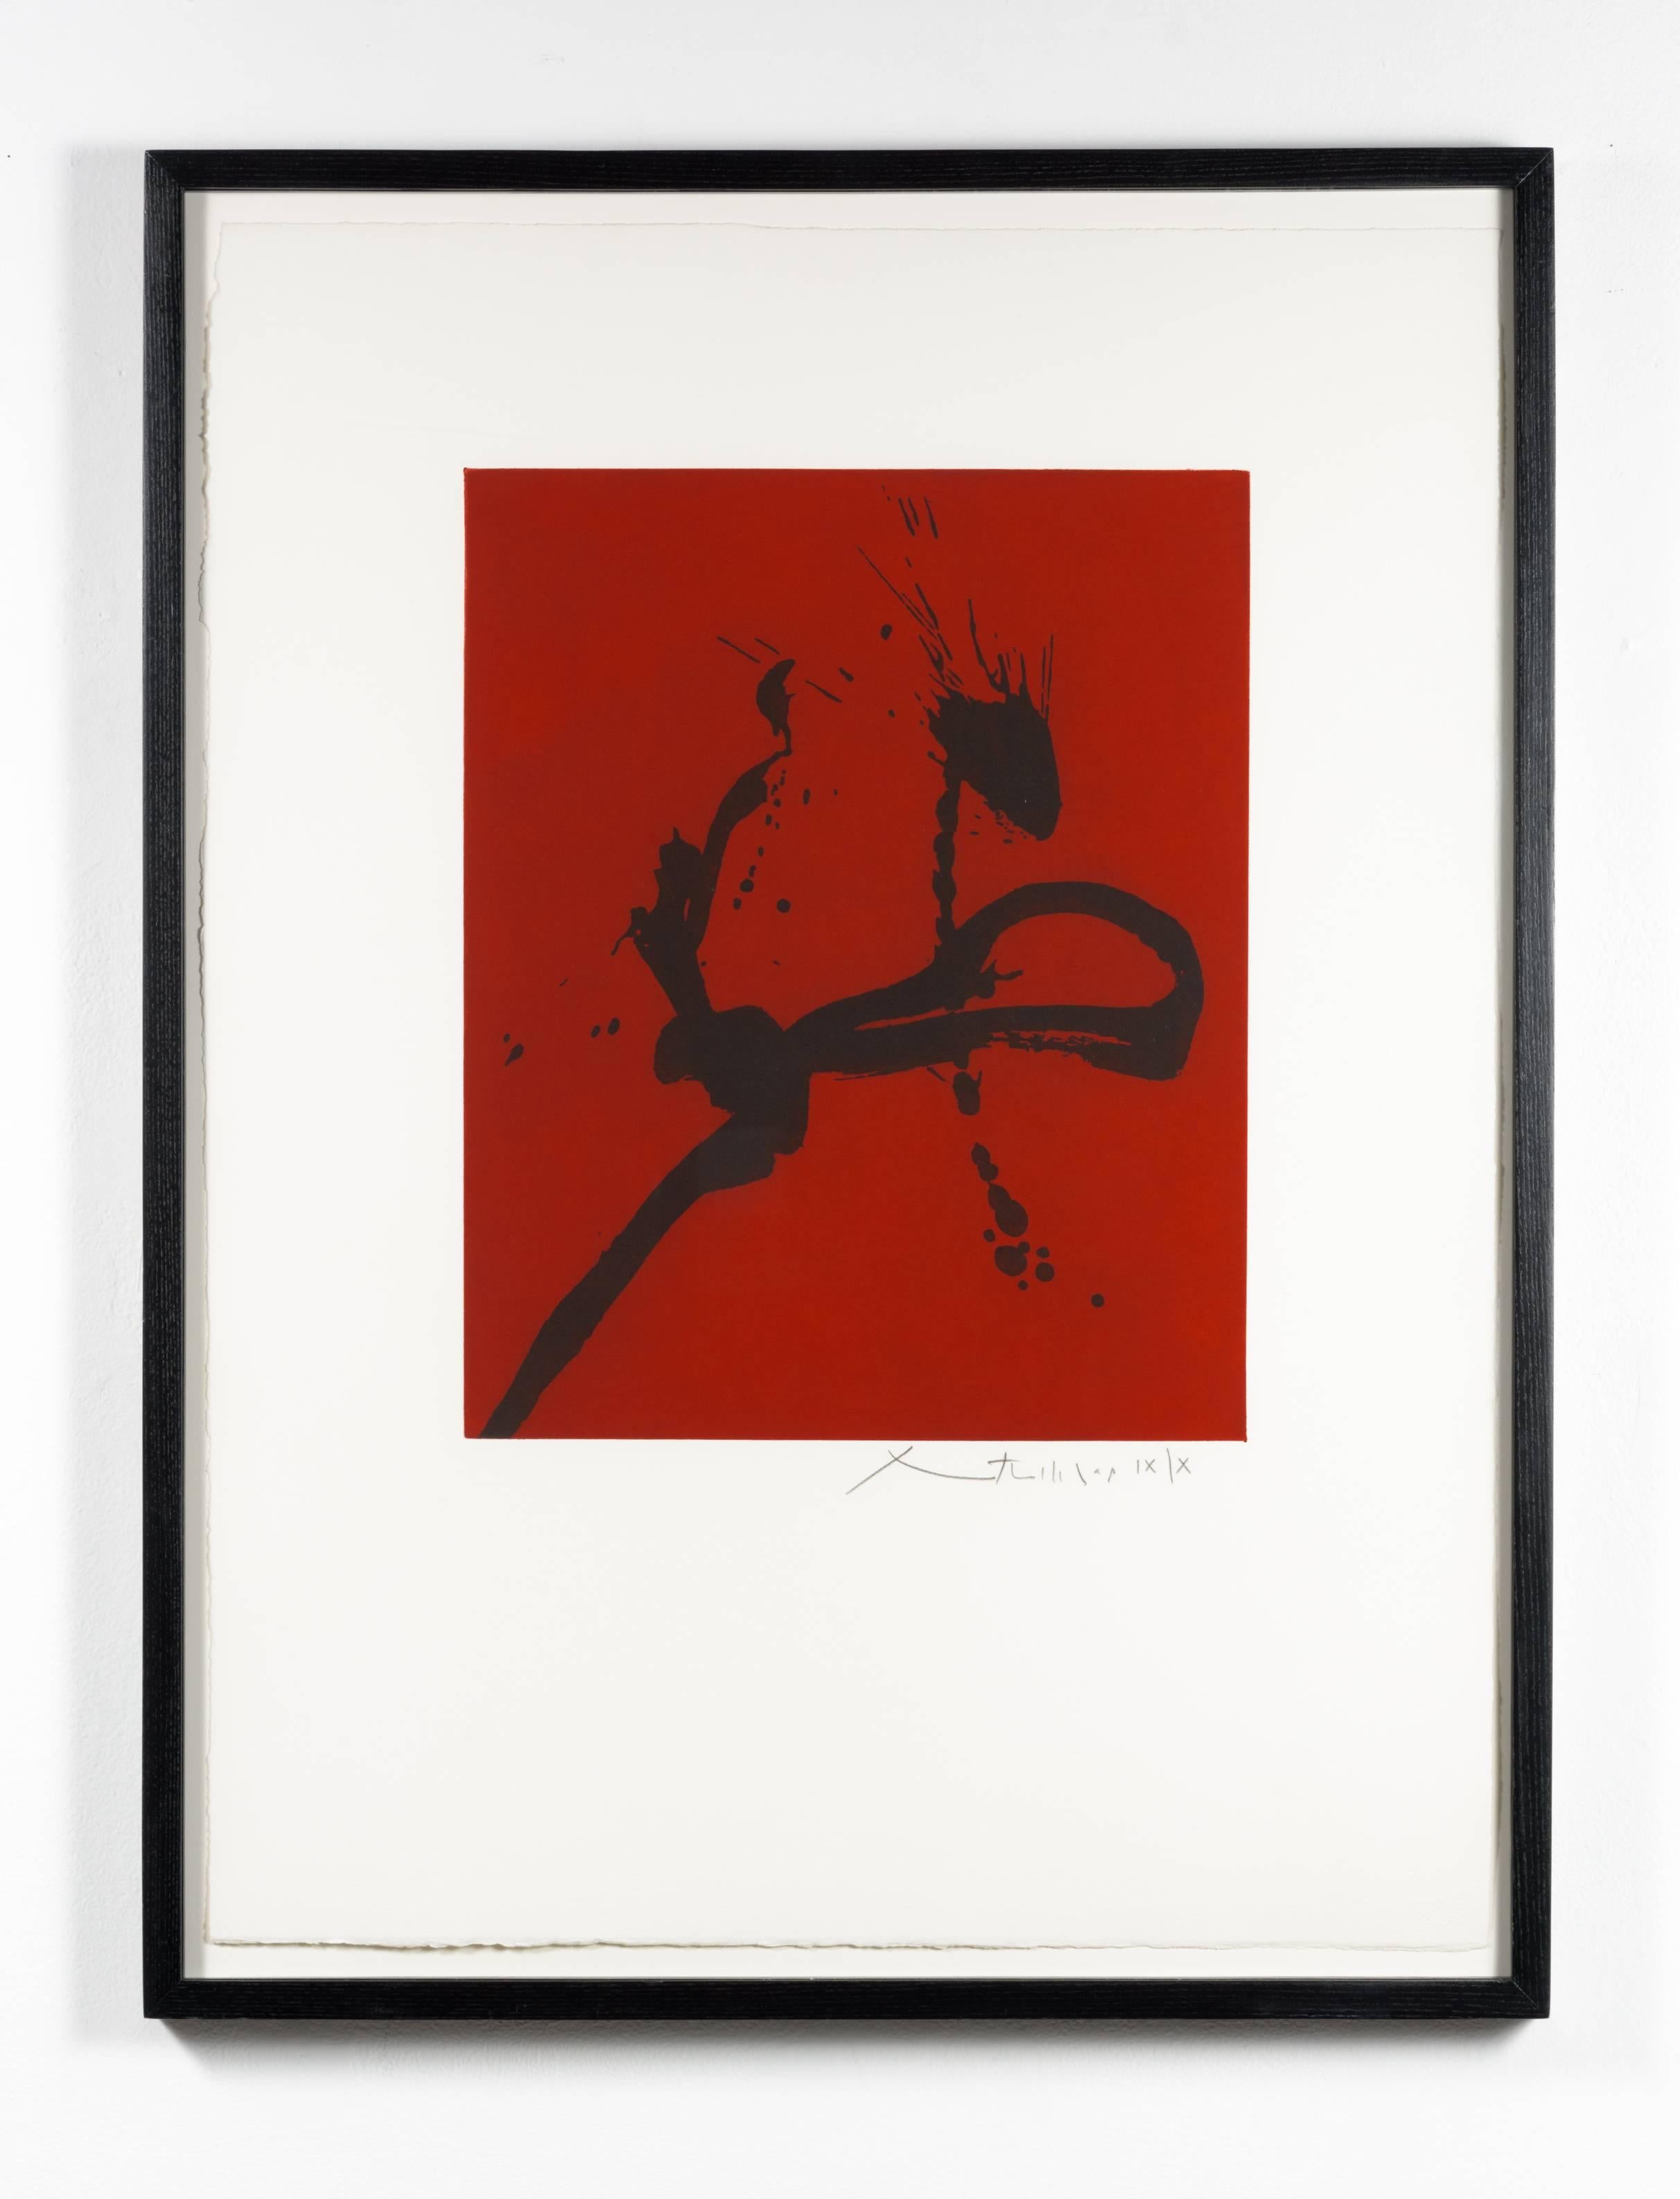 Gesture IV - Contemporary Print by Robert Motherwell